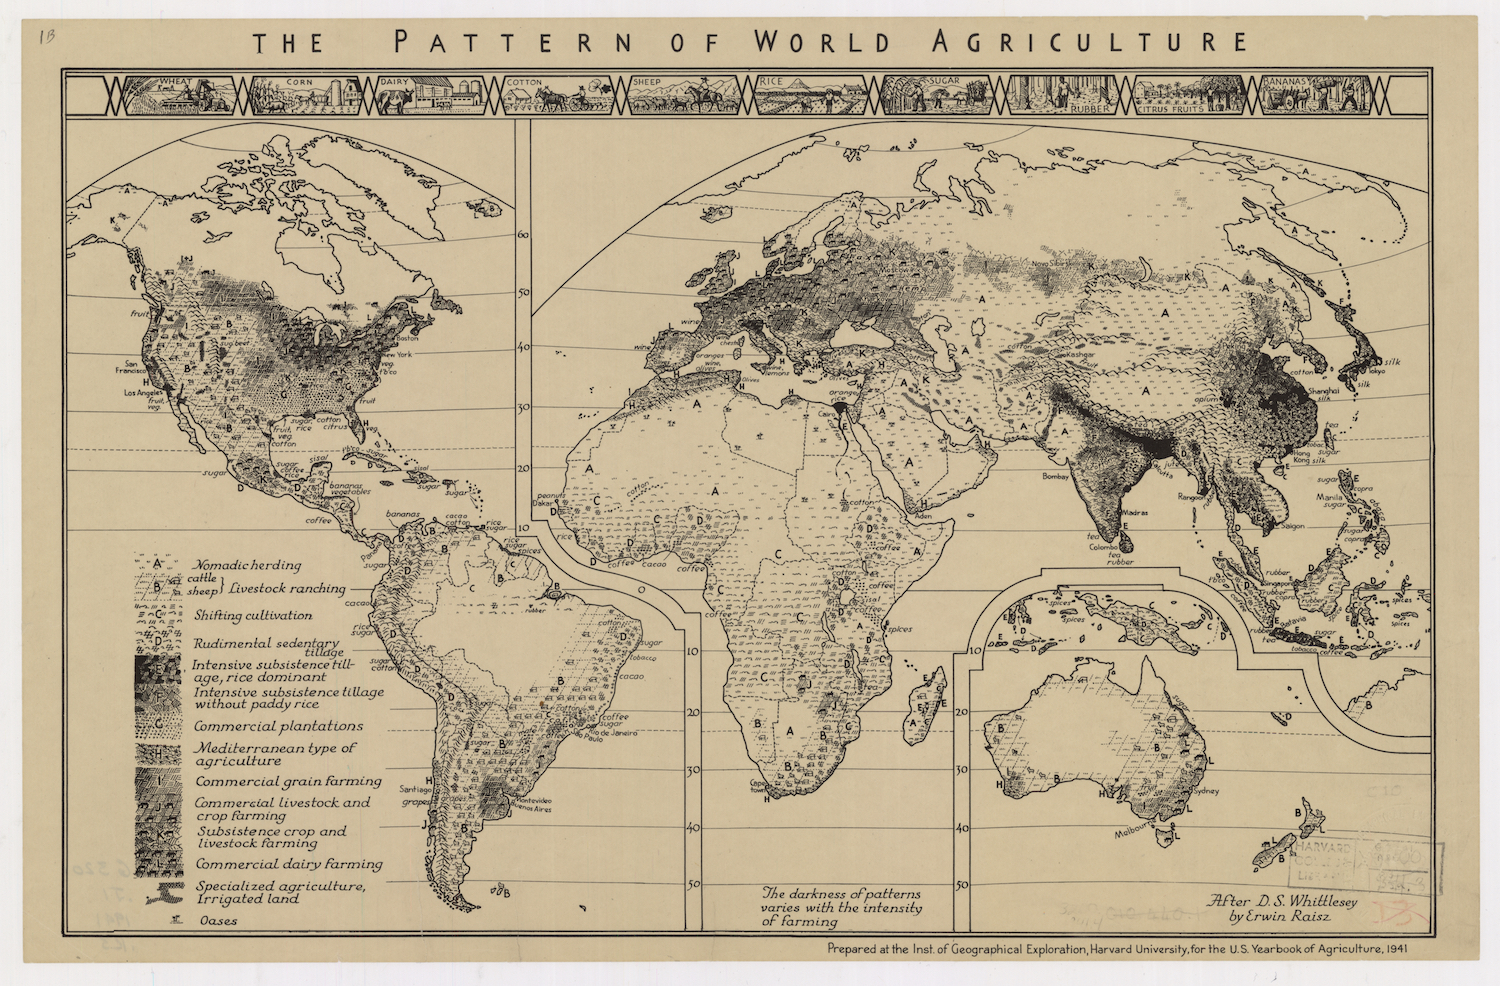 map of the pattern of world agriculture